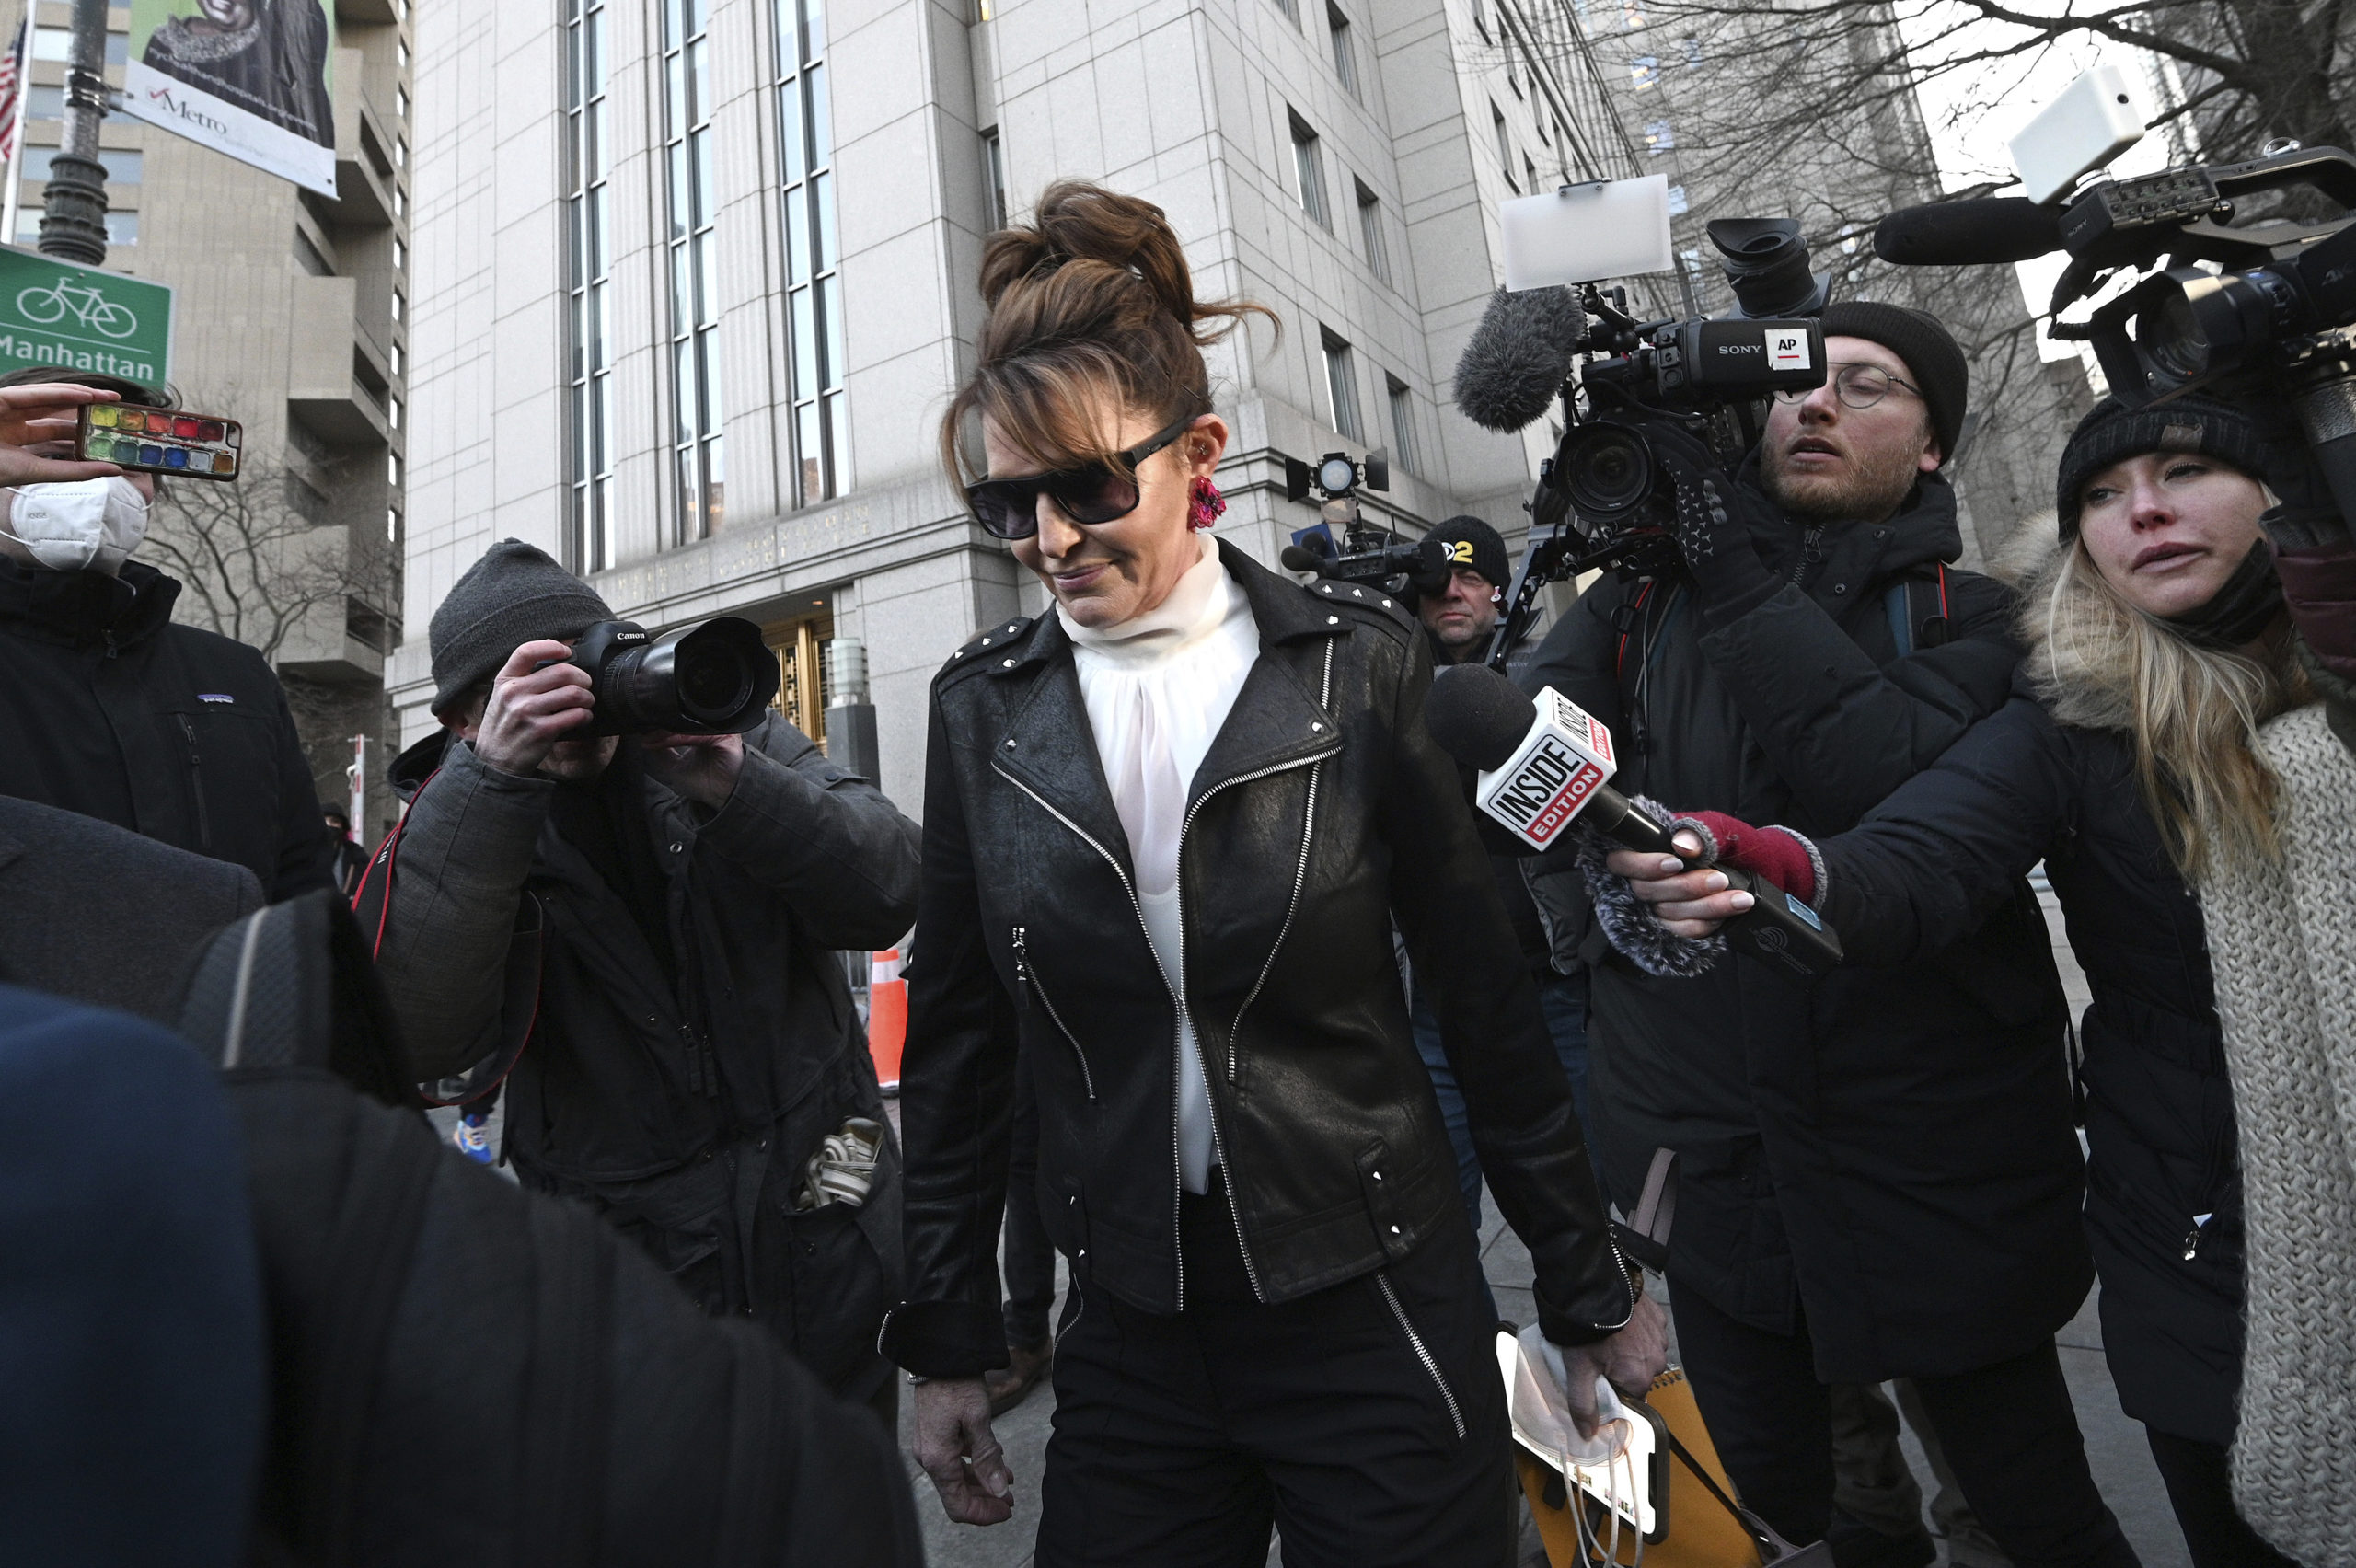 Former Alaska Gov. Sarah Palin is seen leaving the U.S. District Court, in New York, February 14, 2022. U.S. District Judge Jed Rakoff ruled that he will dismiss a libel lawsuit that Palin filed against The New York Times while the jury was still deliberating